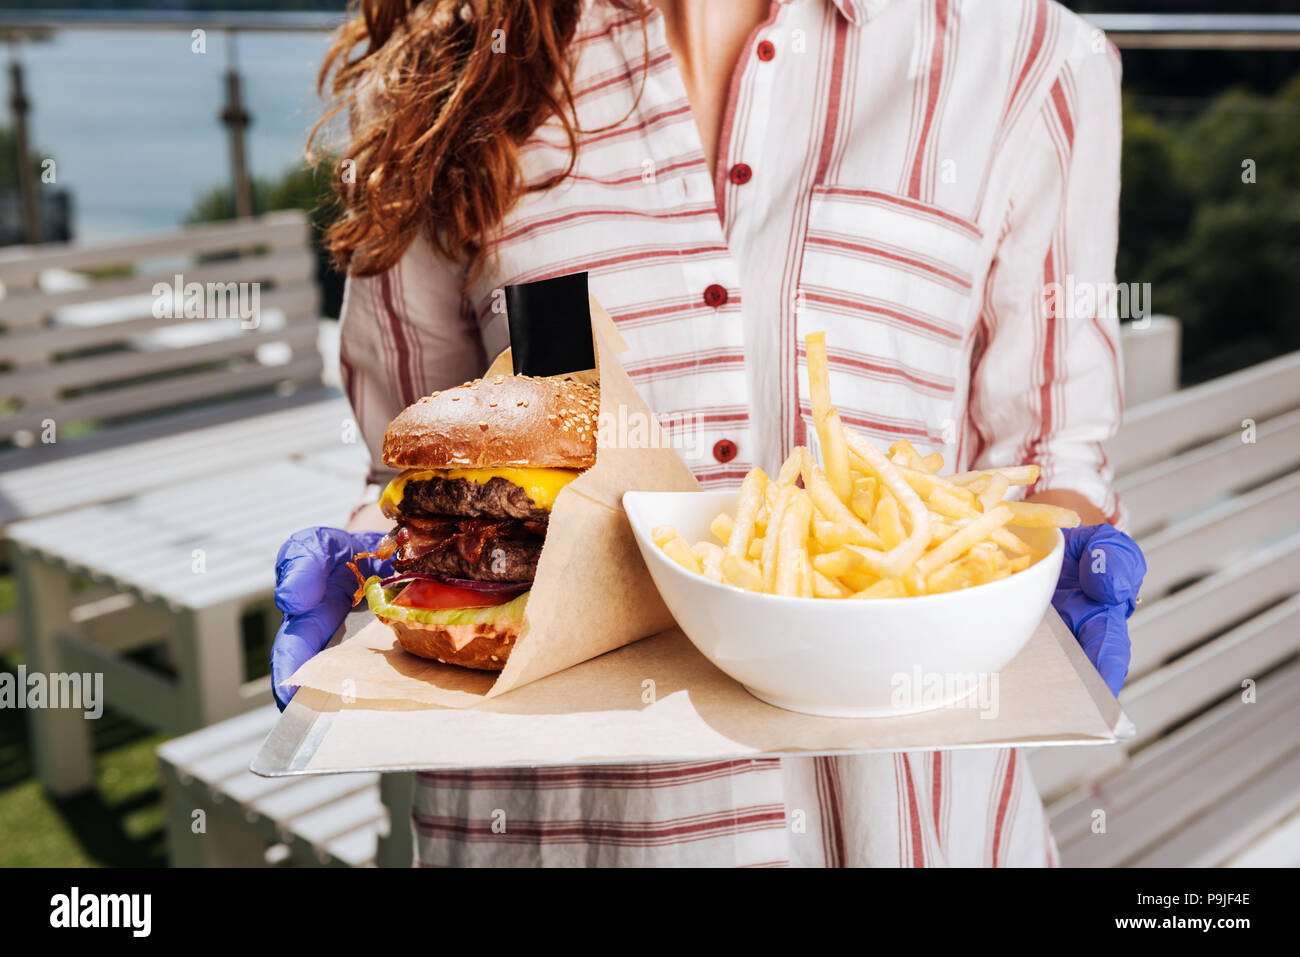 Dark-haired woman wearing white blouse holding burger with fries Stock Photo